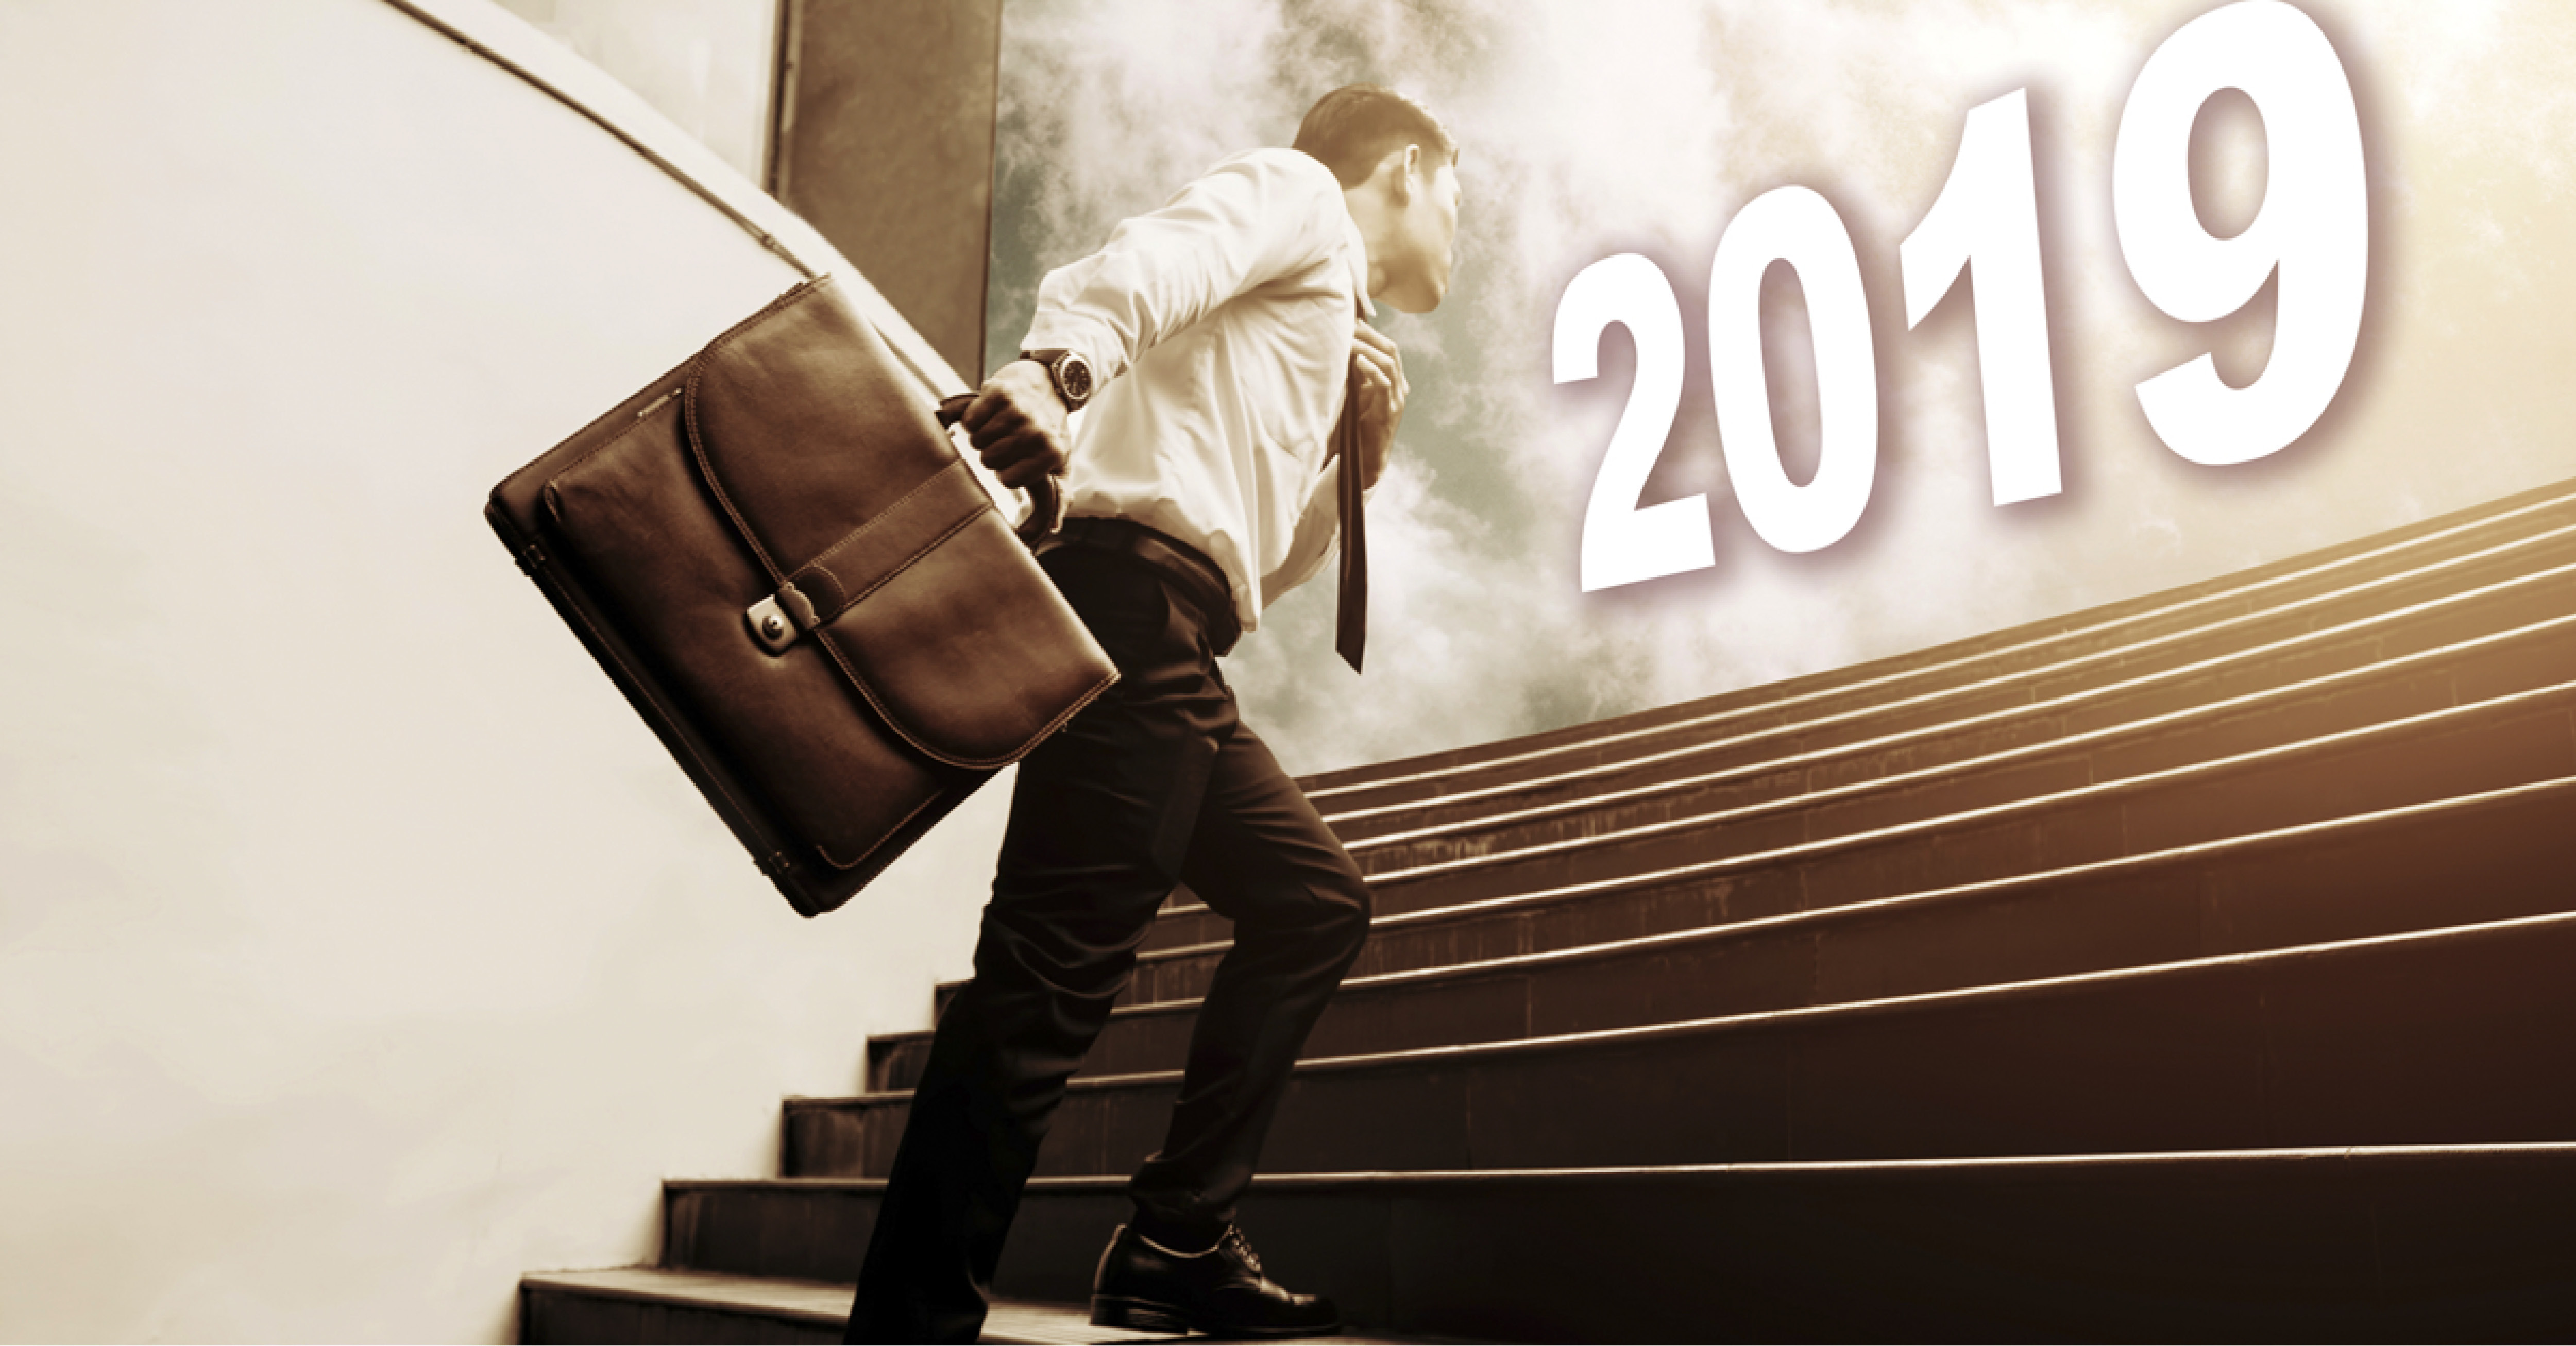 3 Important Steps To Growing Your Business In 2019